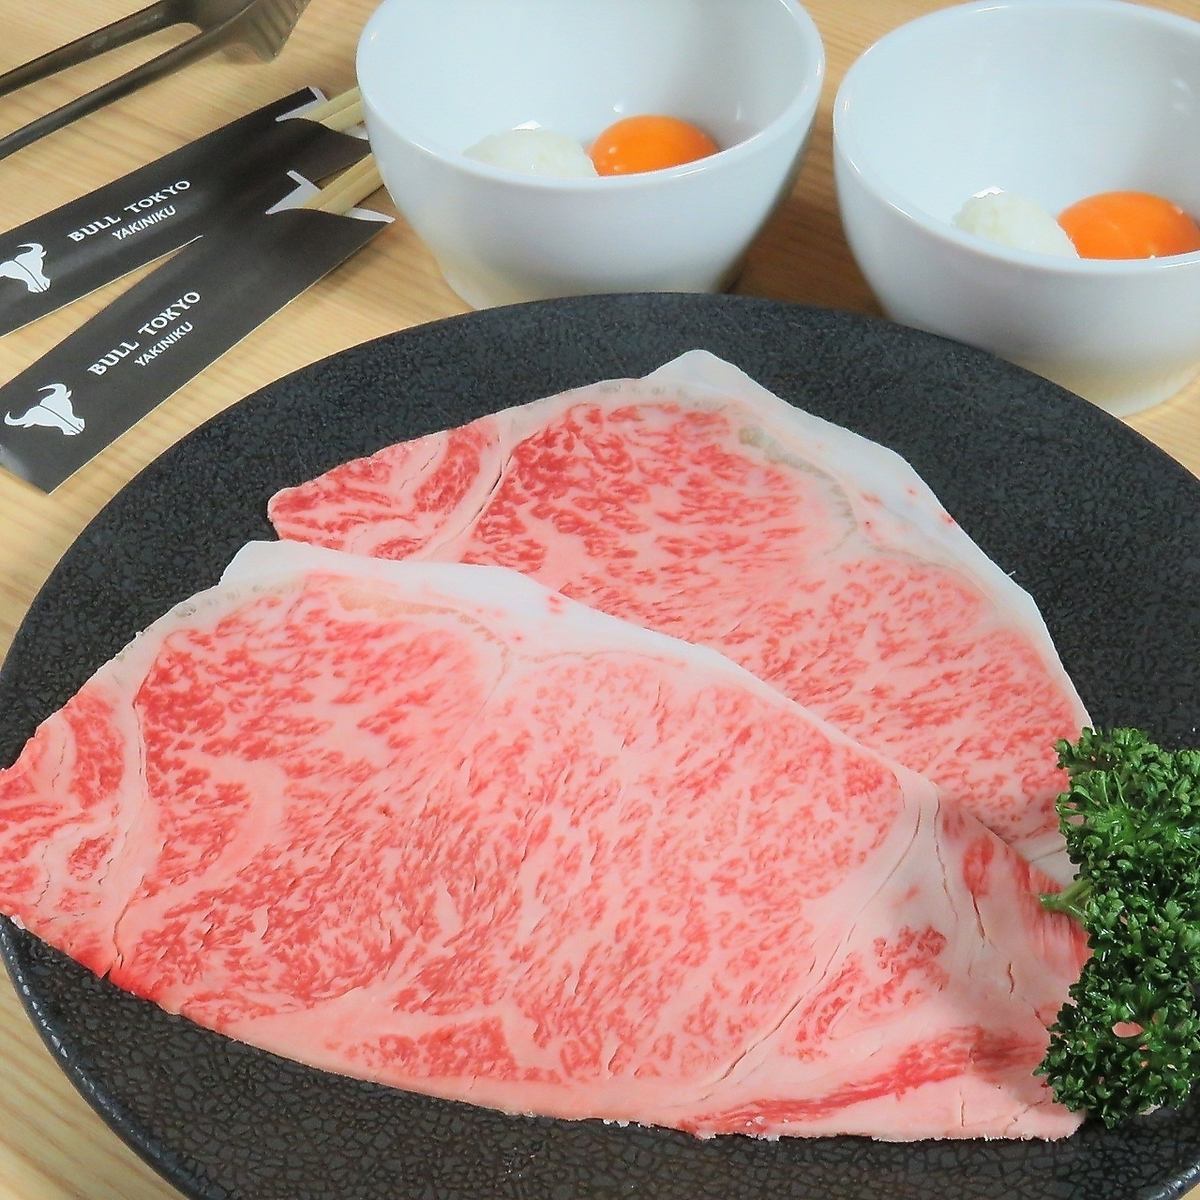 [Yakiniku] [Private rooms available] [Smoking allowed inside] [3-minute walk from Susukino Station] A yakiniku restaurant where you can enjoy it in a stylish space!